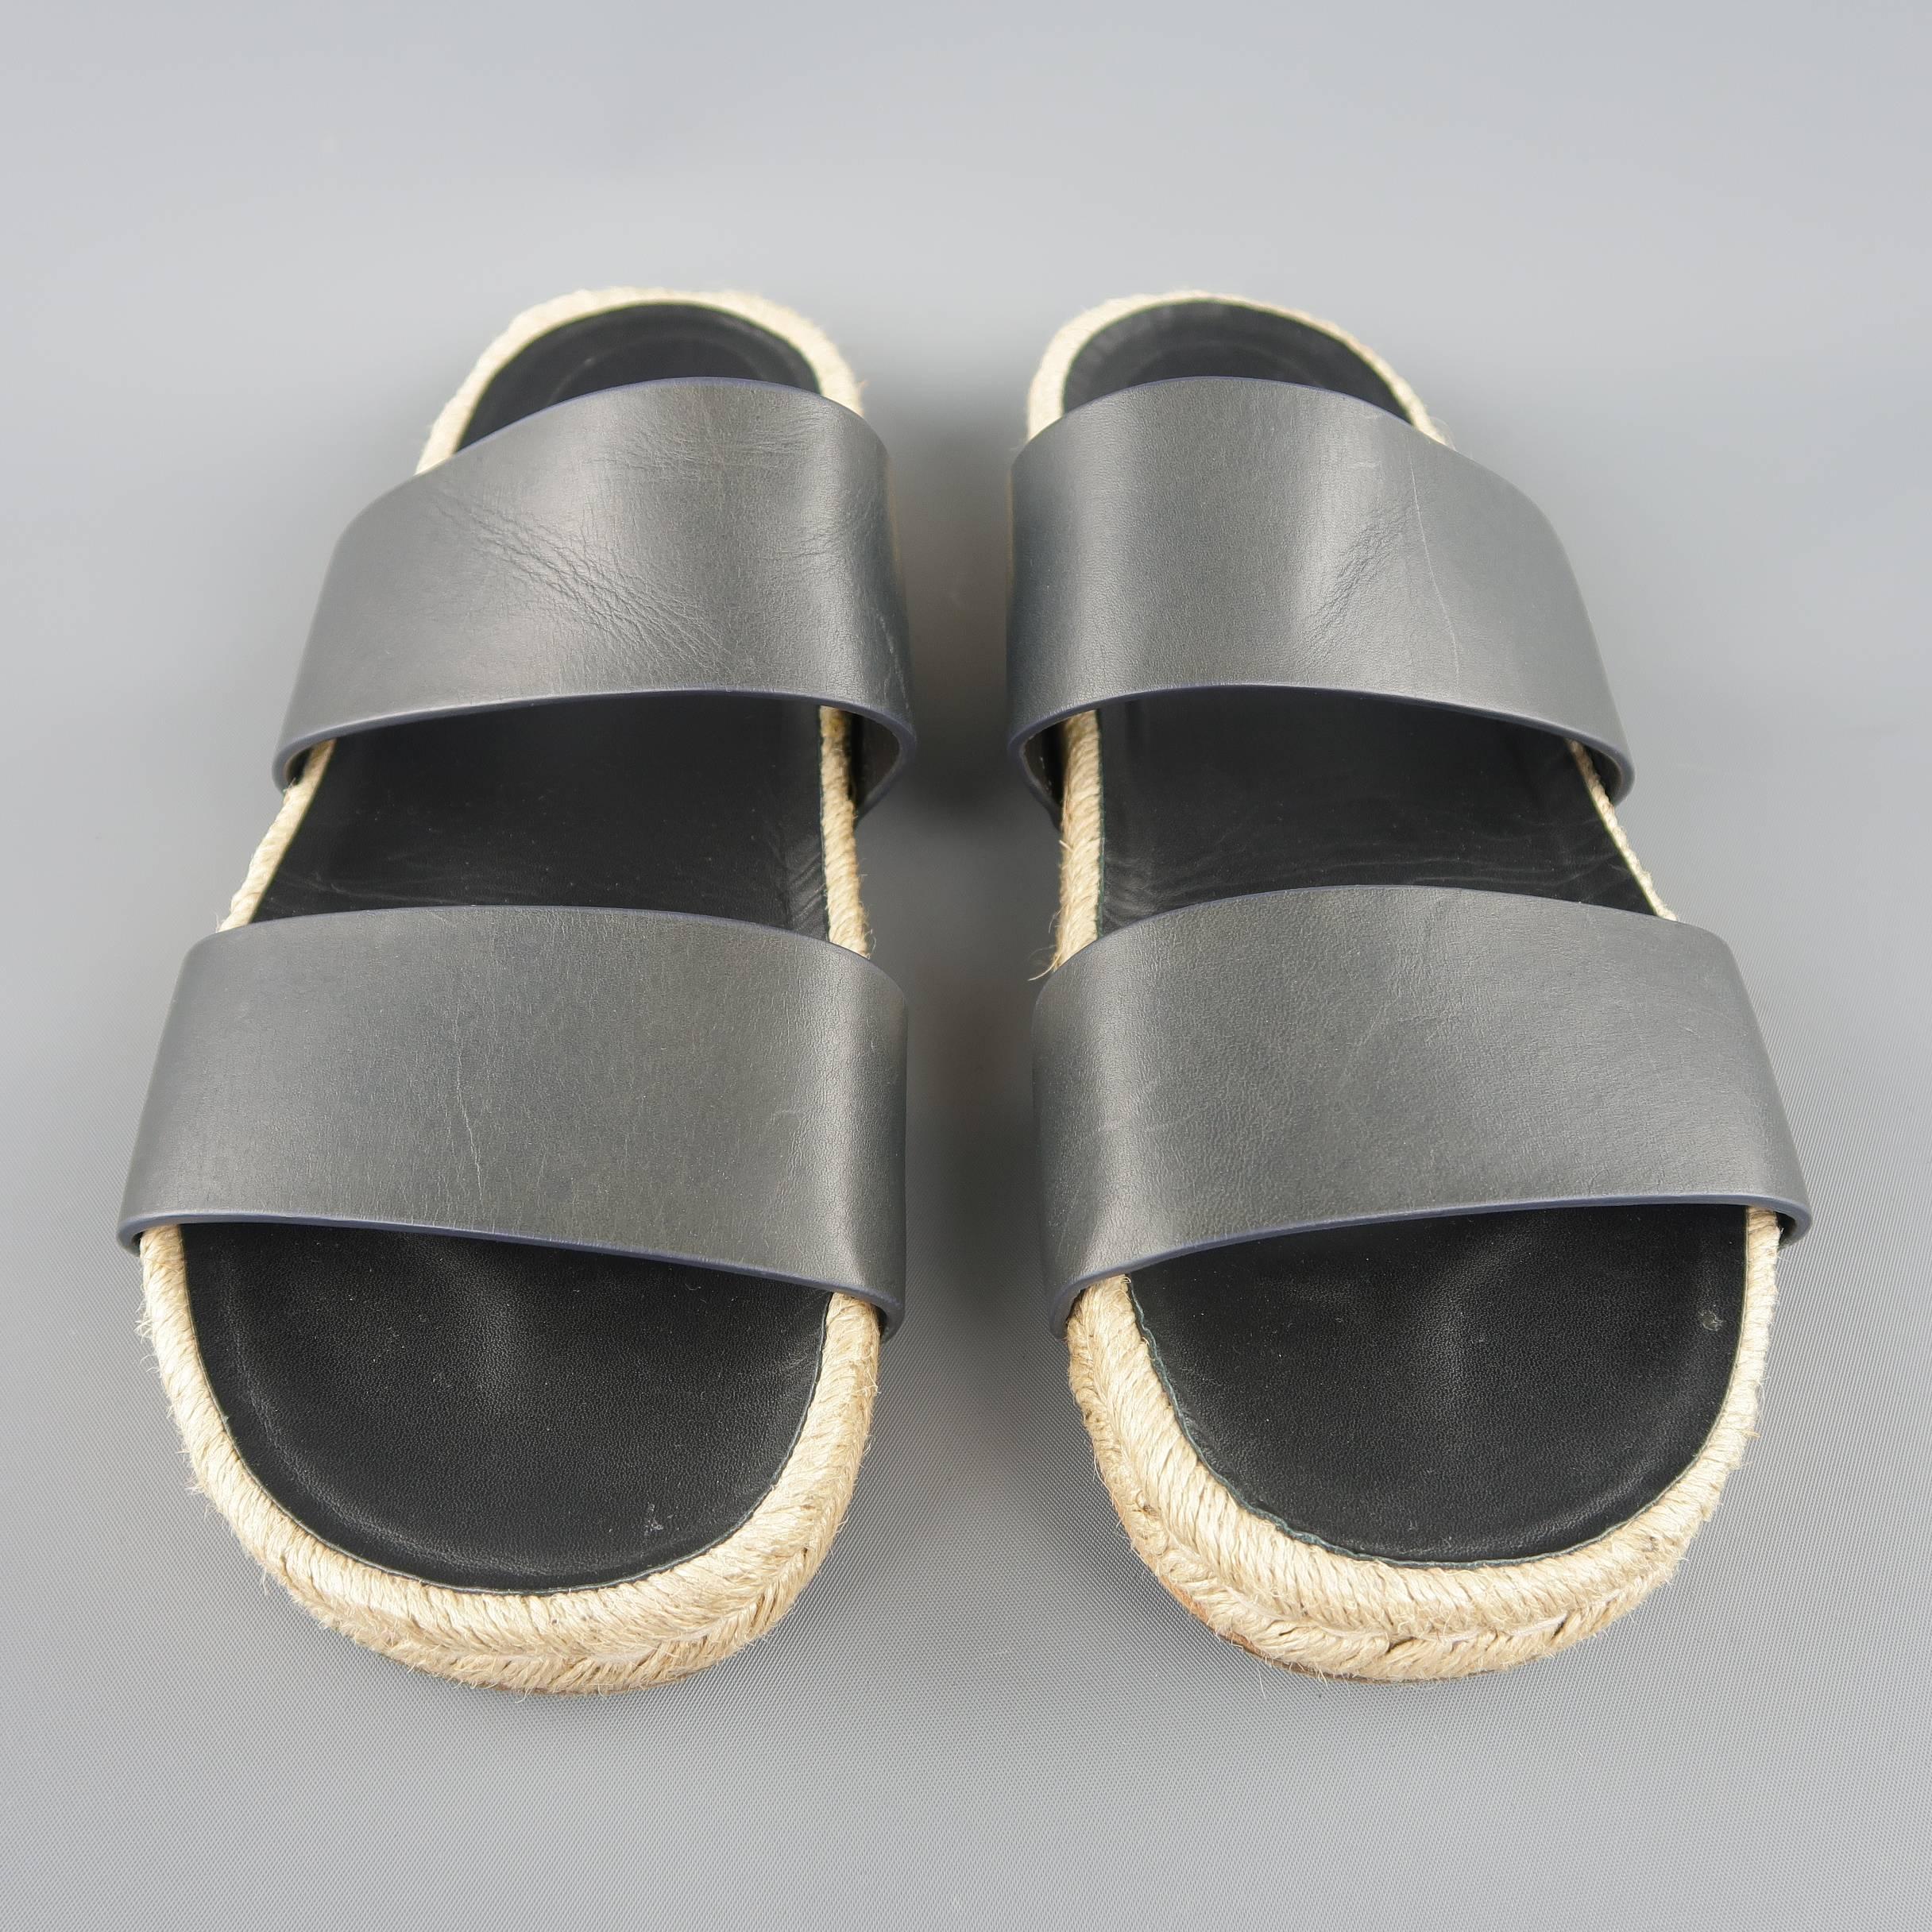 BALENCIAGA sandals feature two thick leather straps on a beige woven espadrille sole. Made in Spain.
 
Excellent Pre-Owned Condition.
Marked: IT 43
 
Outsole: 11.5 x 4 in.
